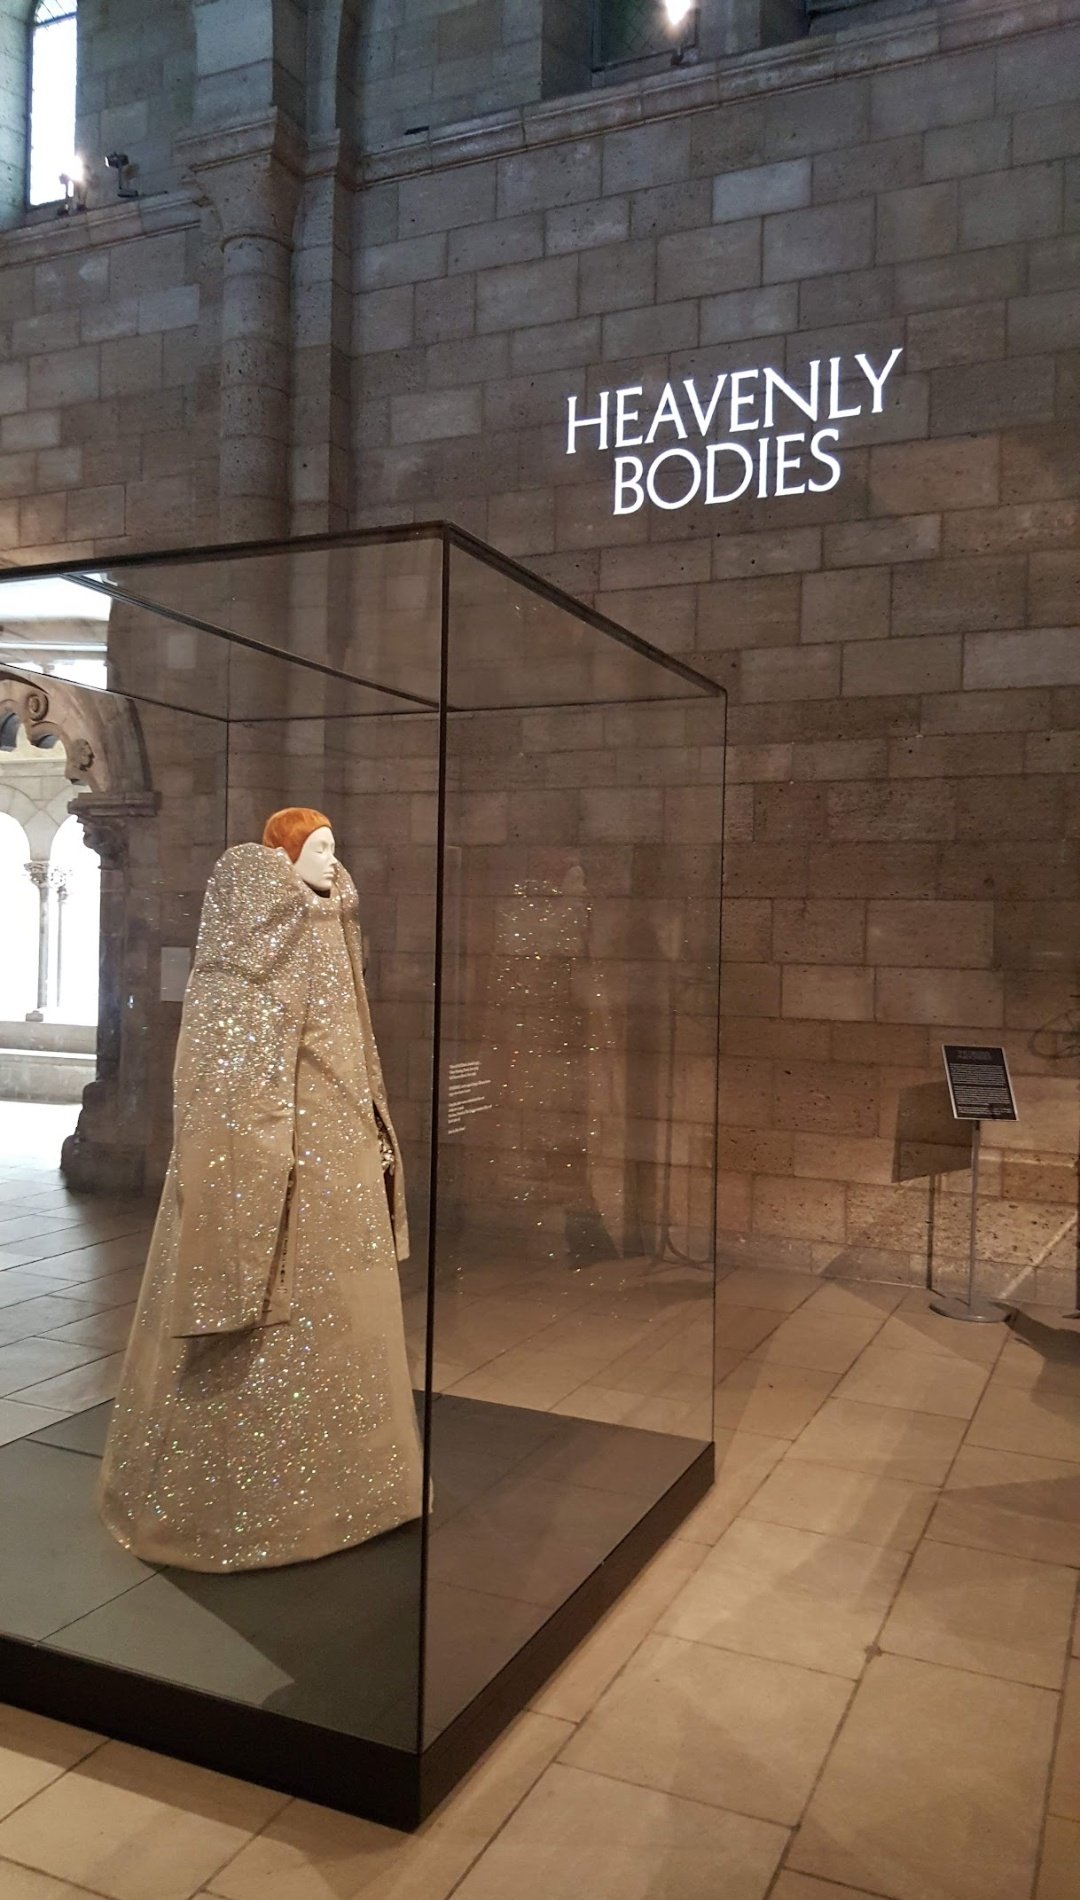 Fashion exhibition at The Met Cloisters